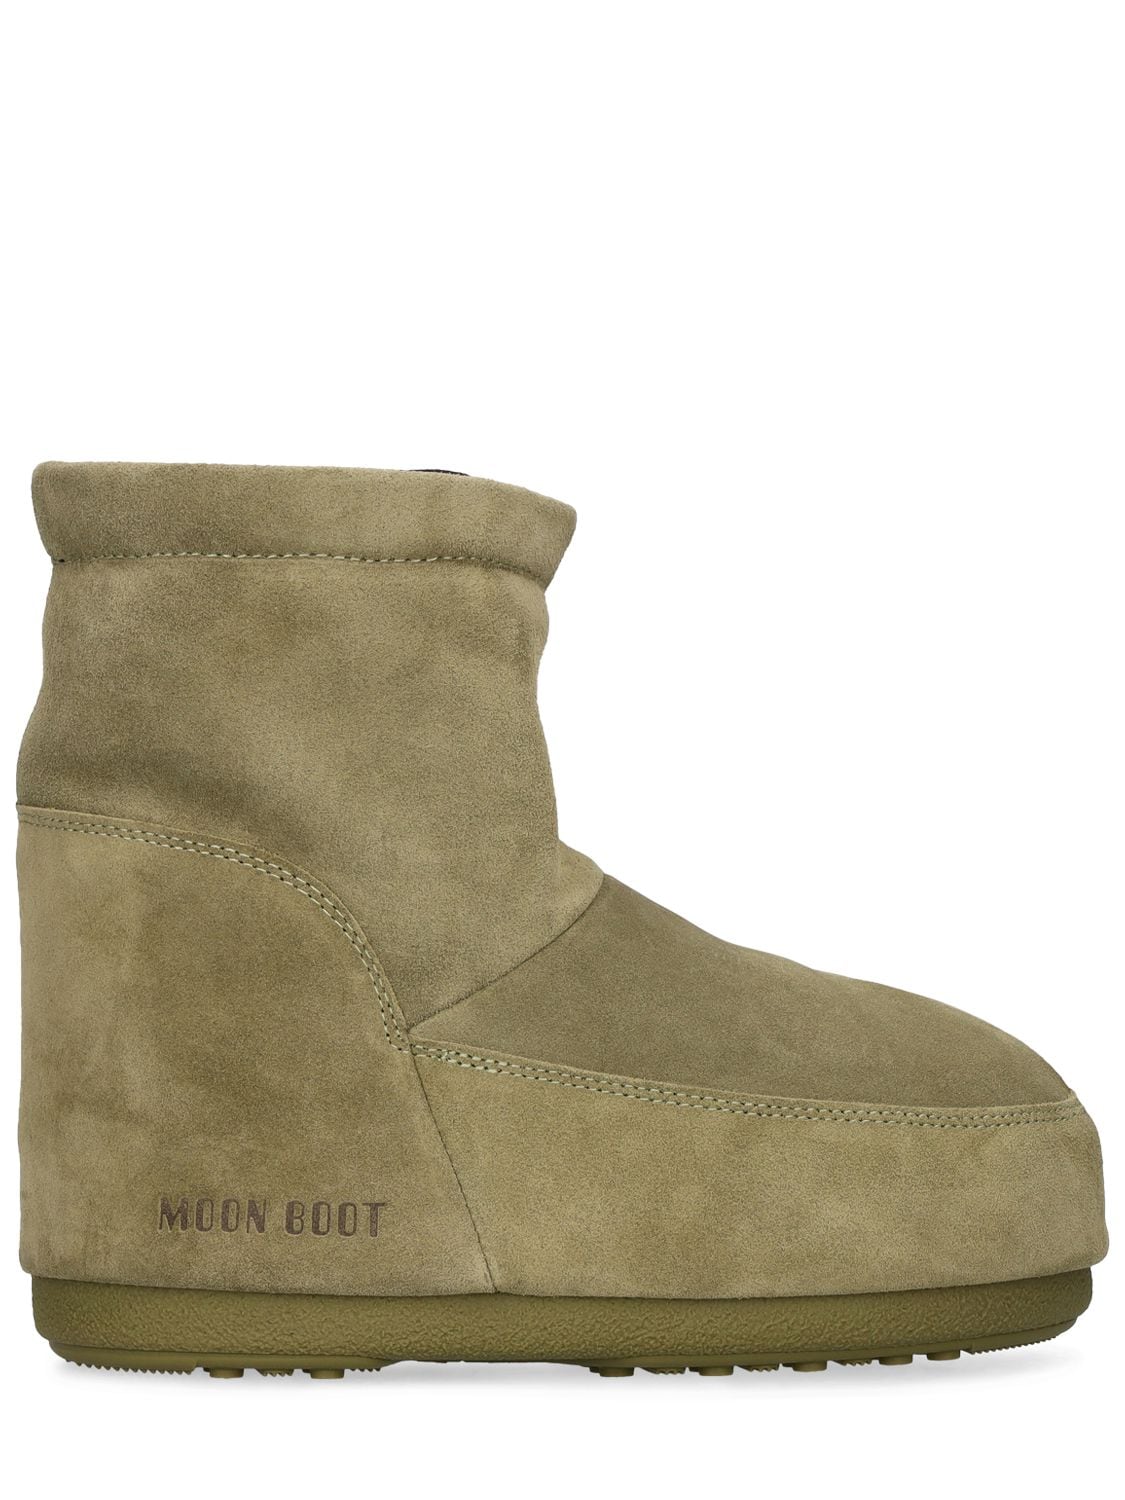 MOON BOOT ICON LOW NOLACE MOON BOOTS